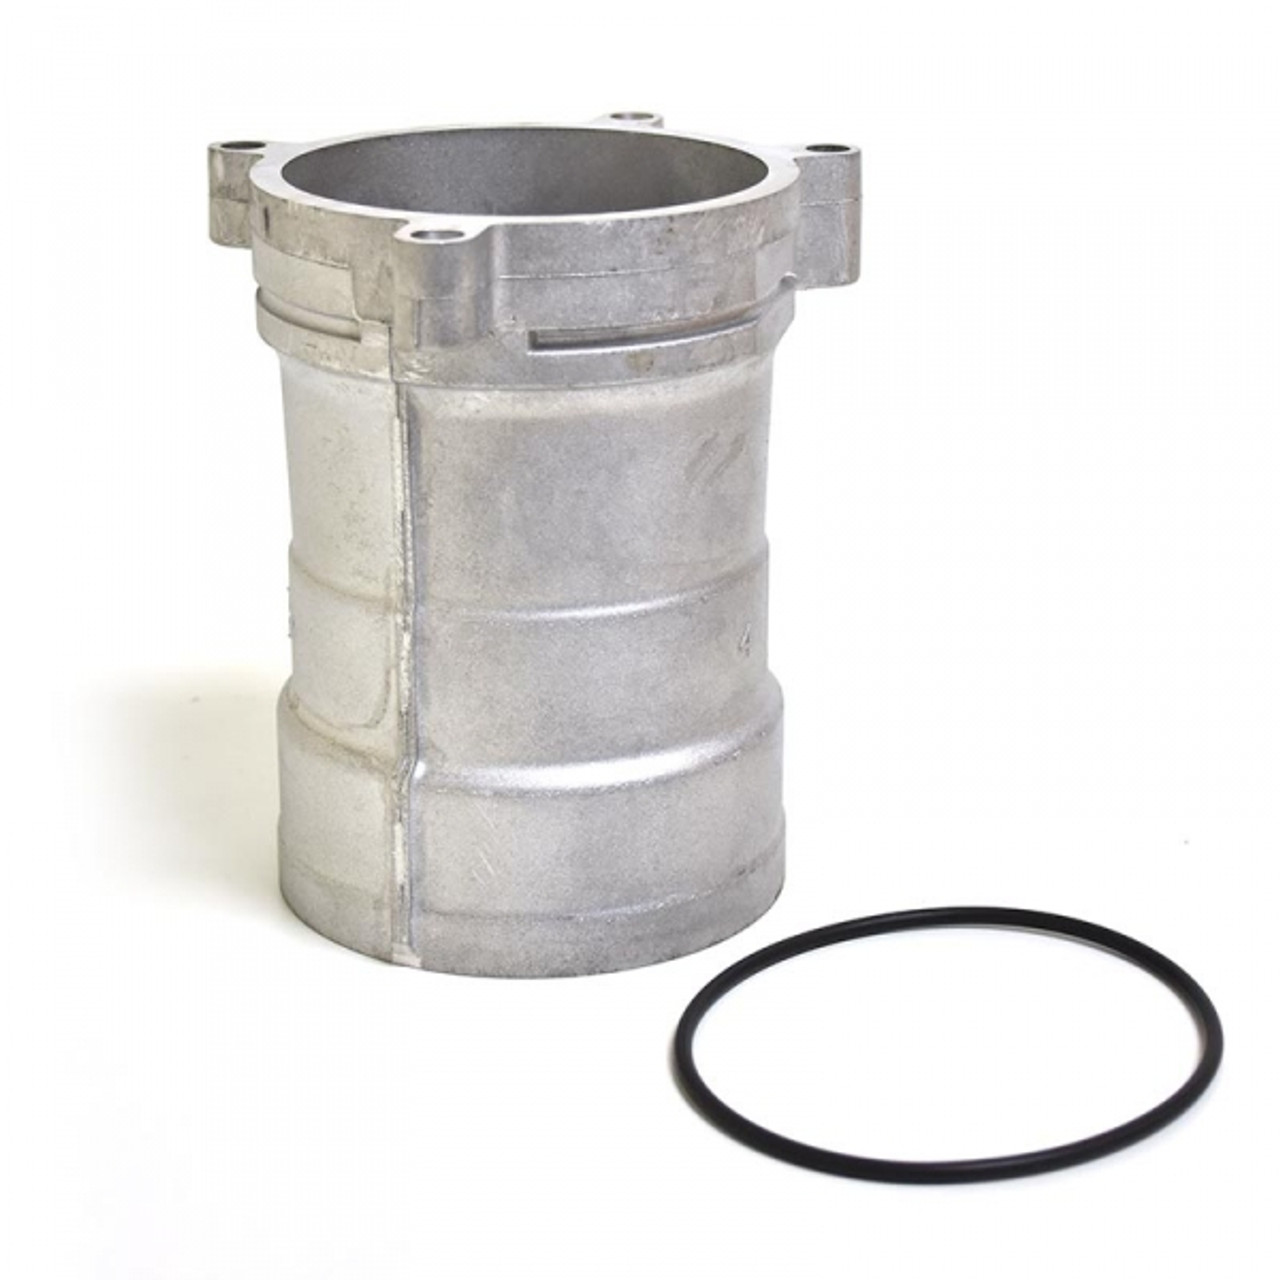 FORD OIL FILTER HOUSING 2008 to 2010 6.4L POWERSTROKE (FO3C3Z-6881-AA)-Main View